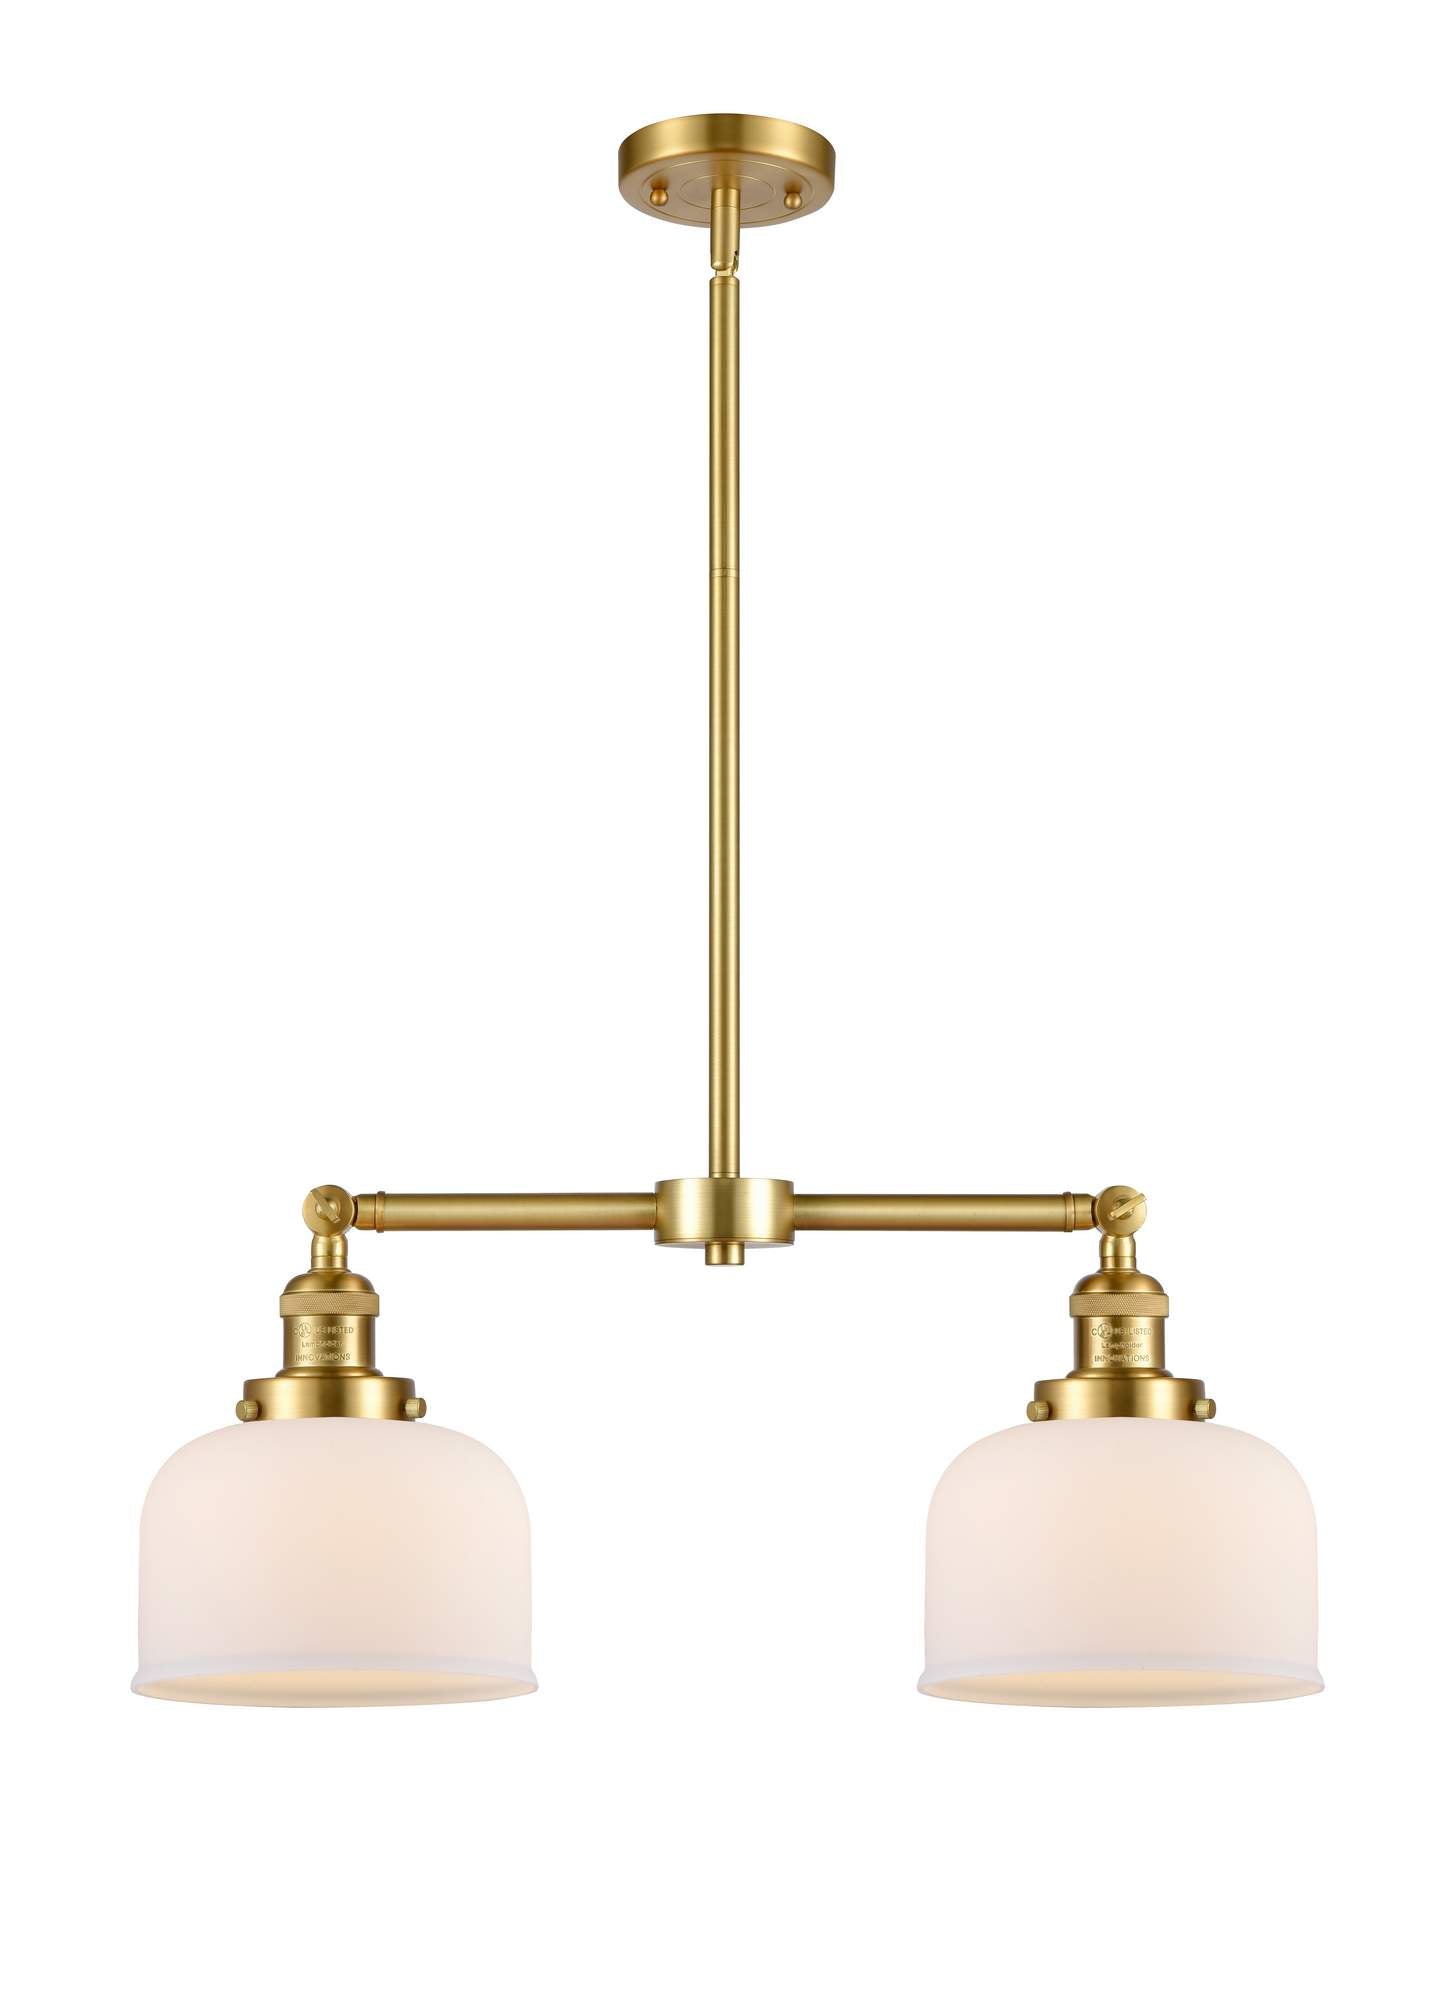 209-SG-G71 2-Light 21" Satin Gold Island Light - Matte White Cased Large Bell Glass - LED Bulb - Dimmensions: 21 x 5 x 10<br>Minimum Height : 20.875<br>Maximum Height : 44.875 - Sloped Ceiling Compatible: Yes